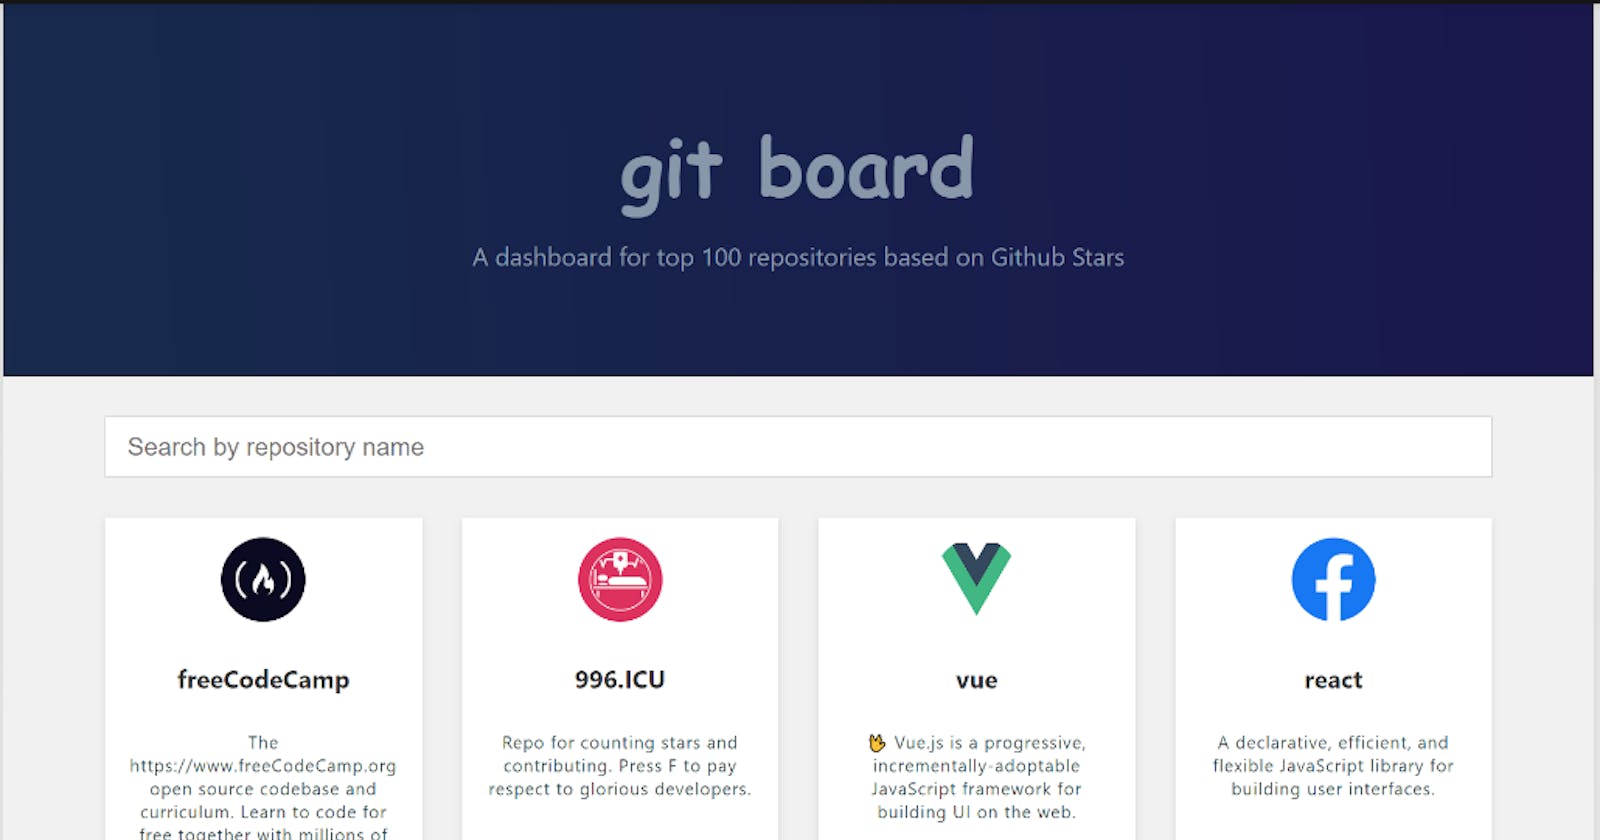 Git board - A dashboard build using React in two days from scratch